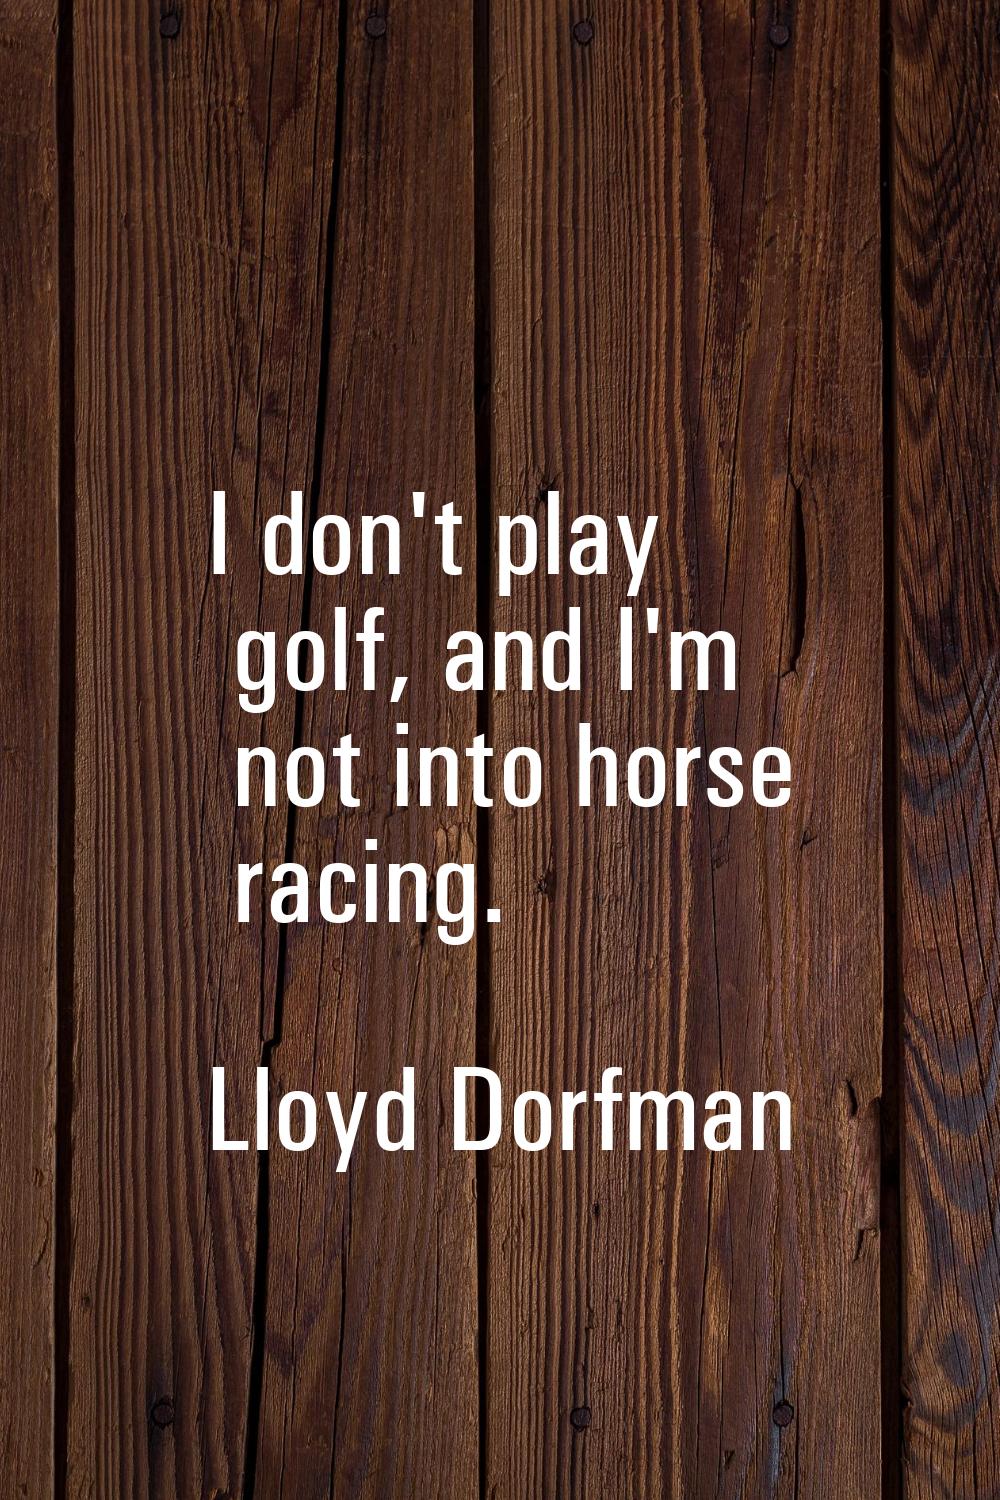 I don't play golf, and I'm not into horse racing.